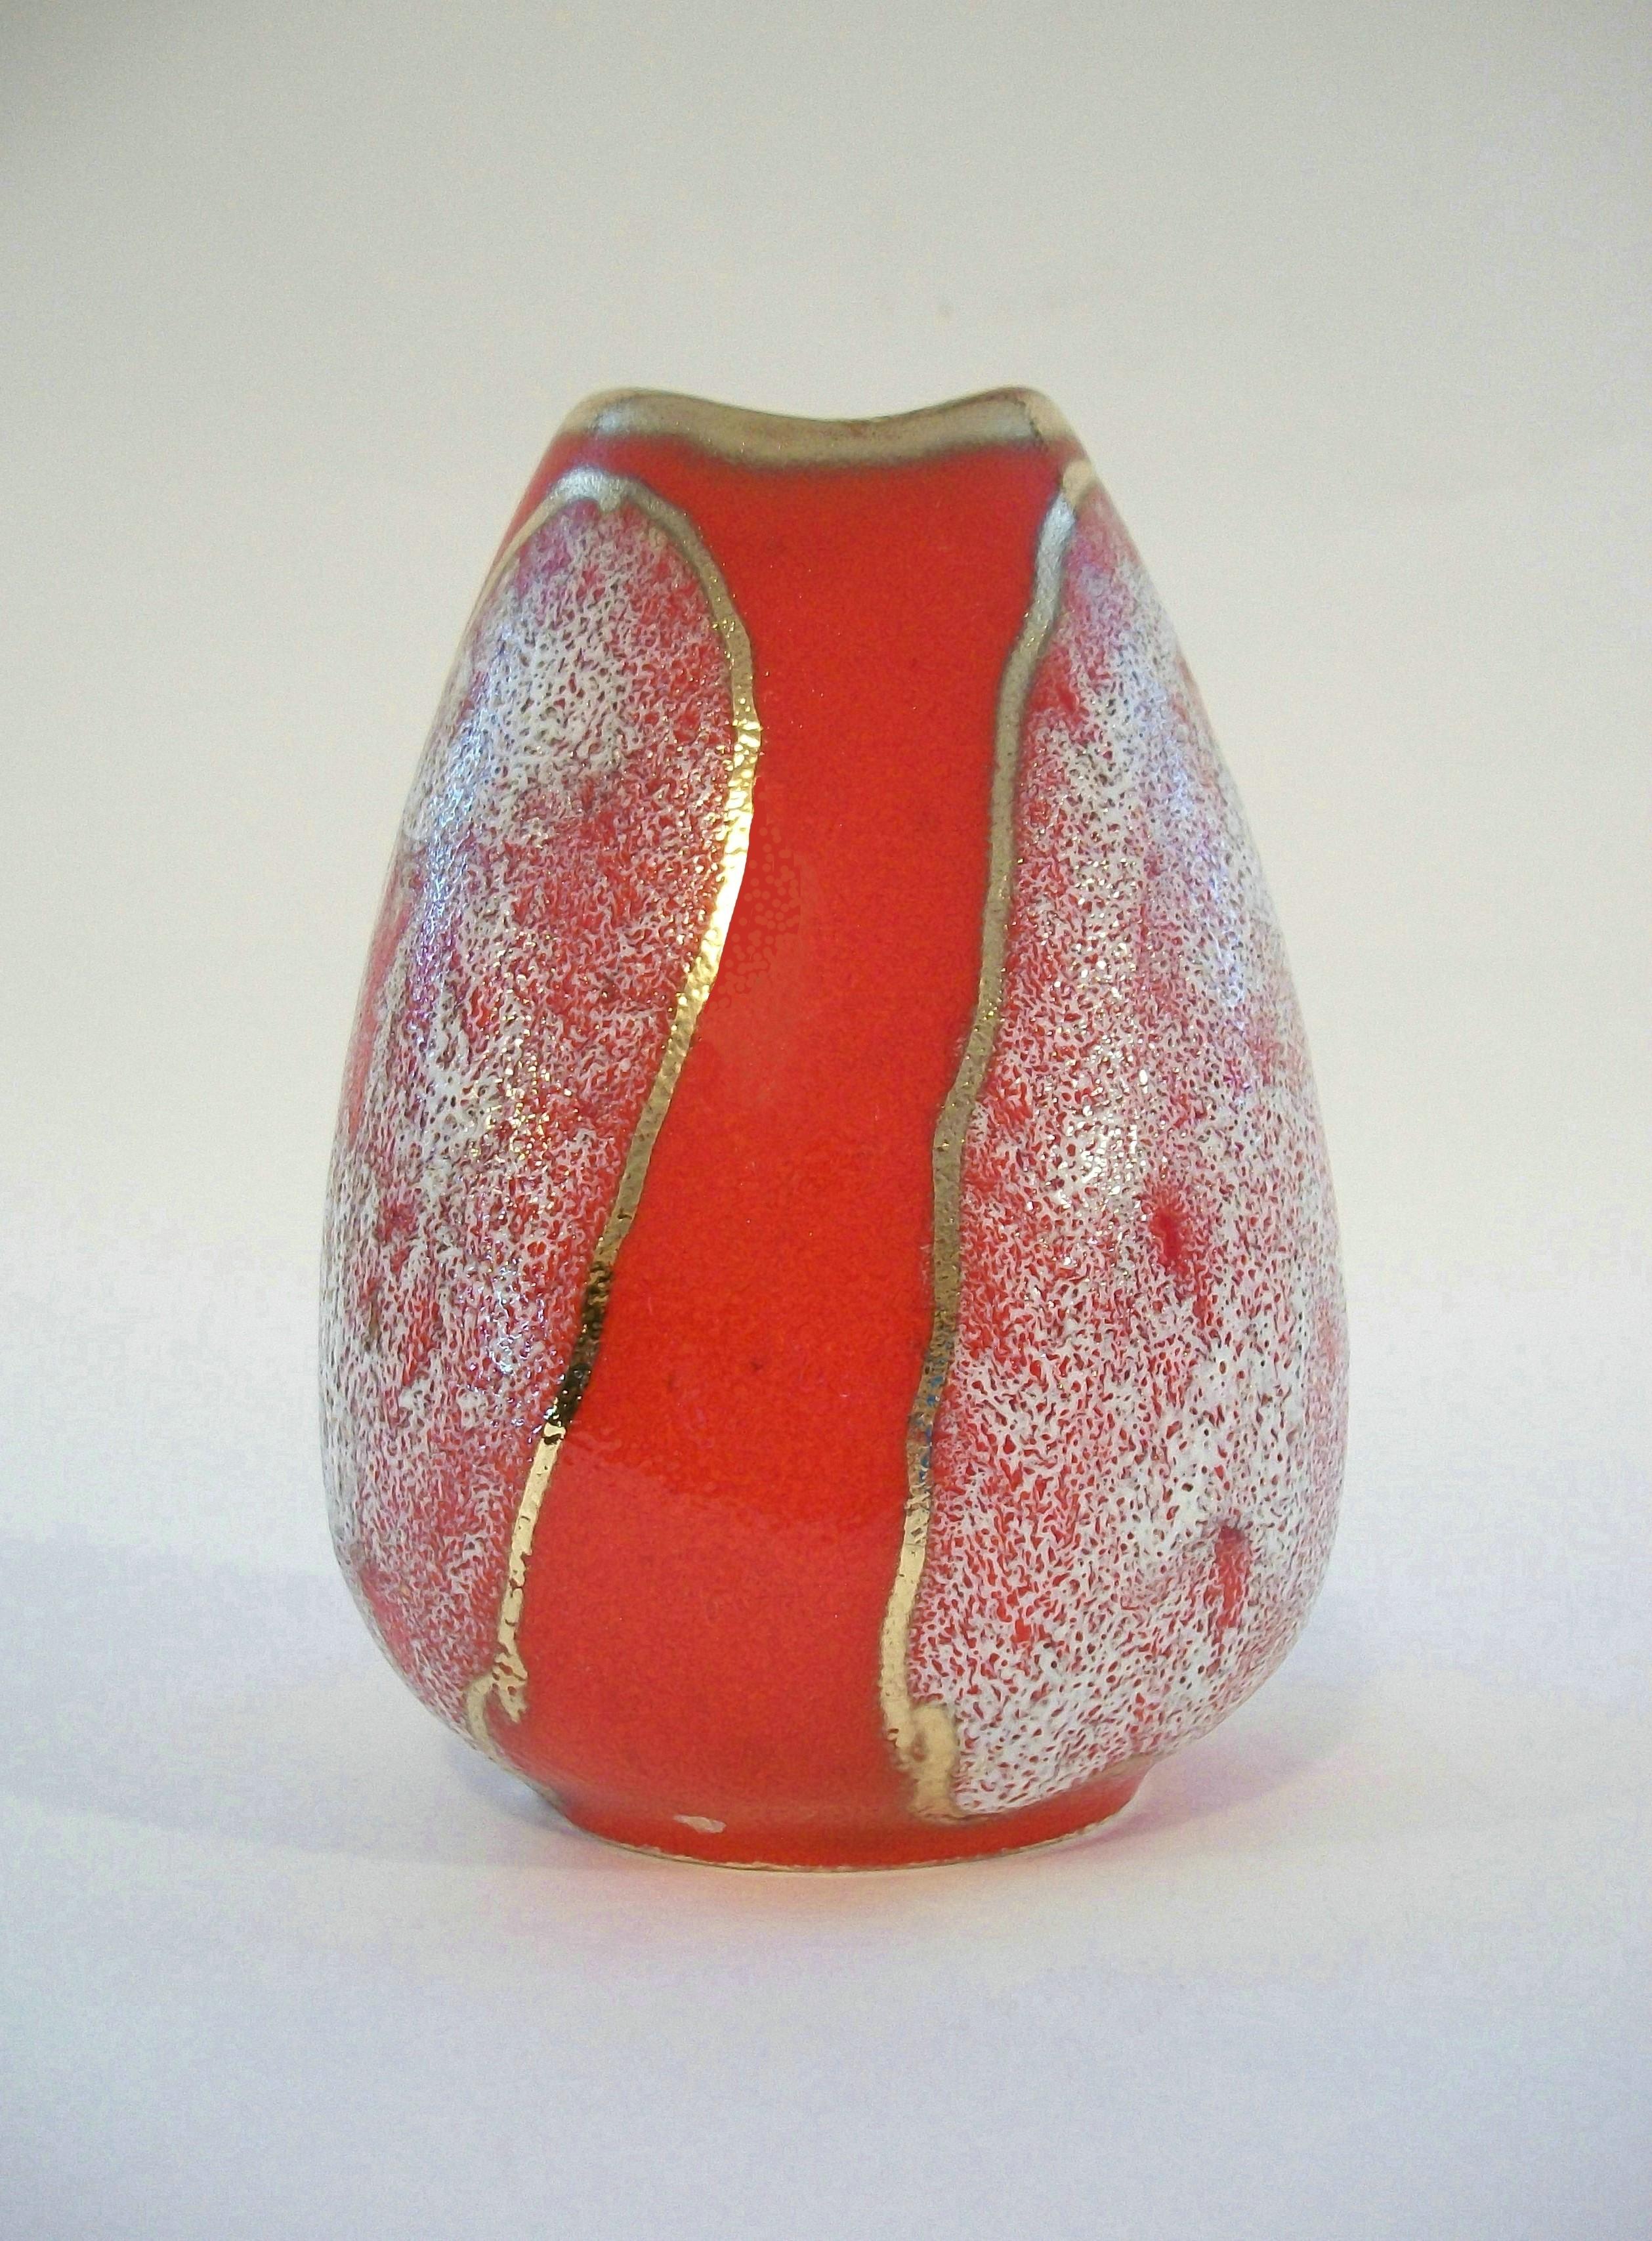 JASBA - Mid Century lava glaze ceramic vase with gold highlights - hand painted - impressed model number 582/15 - GERMANY - circa 1960's.

Excellent vintage condition - minor firing/glaze flaws near the base - no loss - no damage - no repairs -